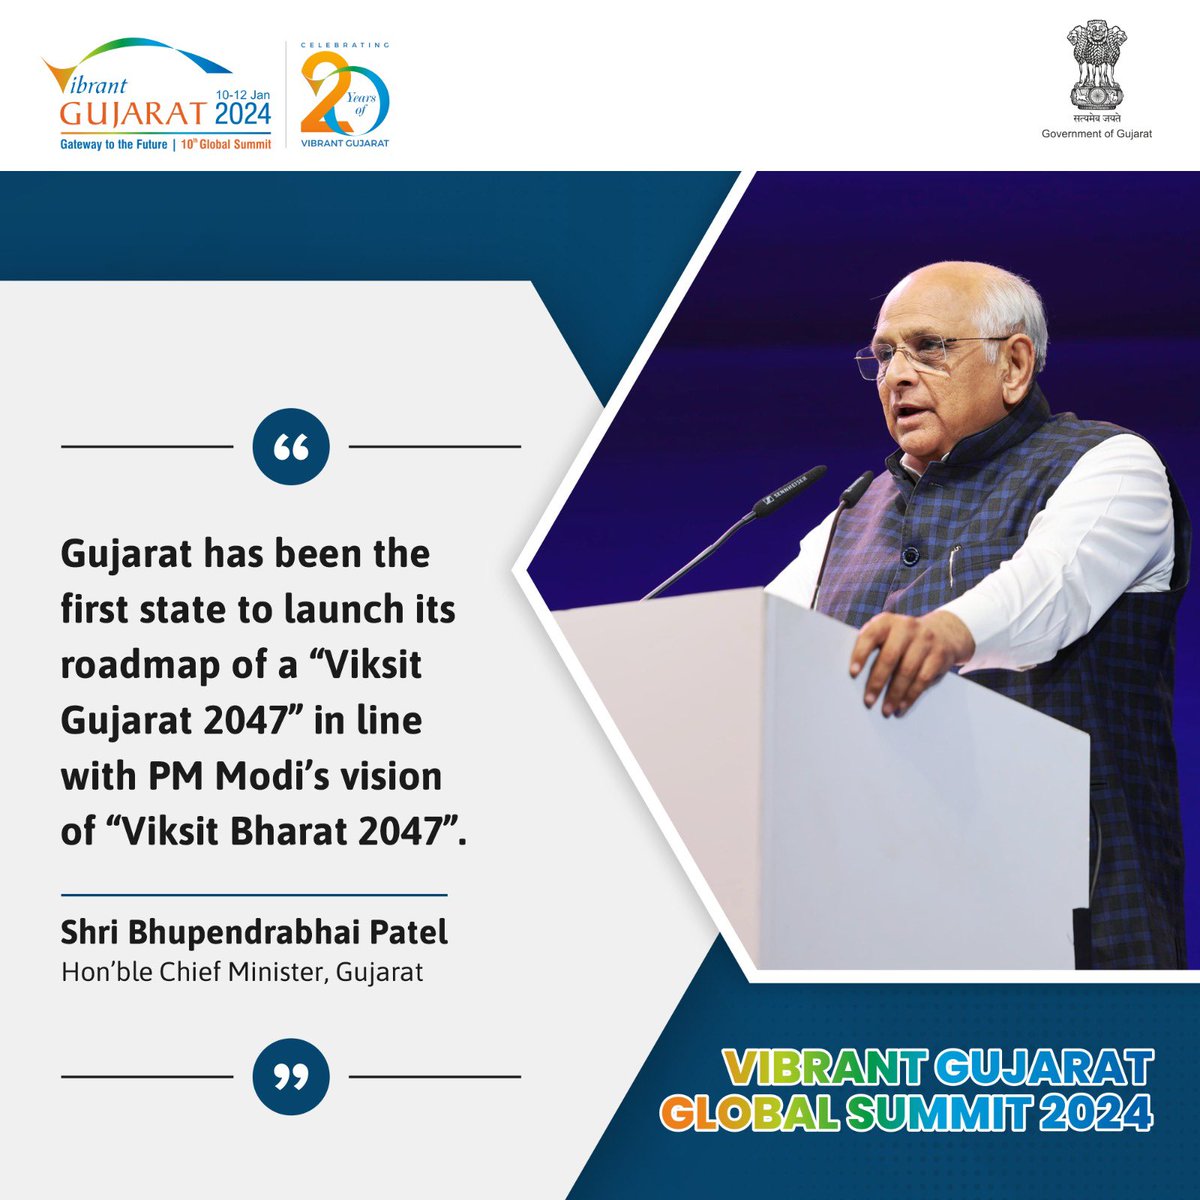 Hon’ble CM Shri @Bhupendrapbjp in his address at the Valedictory Session of #VGGS2024 shared that Gujarat has been leading the way by launching its roadmap of a “Viksit Gujarat 2047”, aligning with Hon’ble PM Shri @narendramodi’s vision of “Viksit Bharat 2047.” #VibrantGujarat